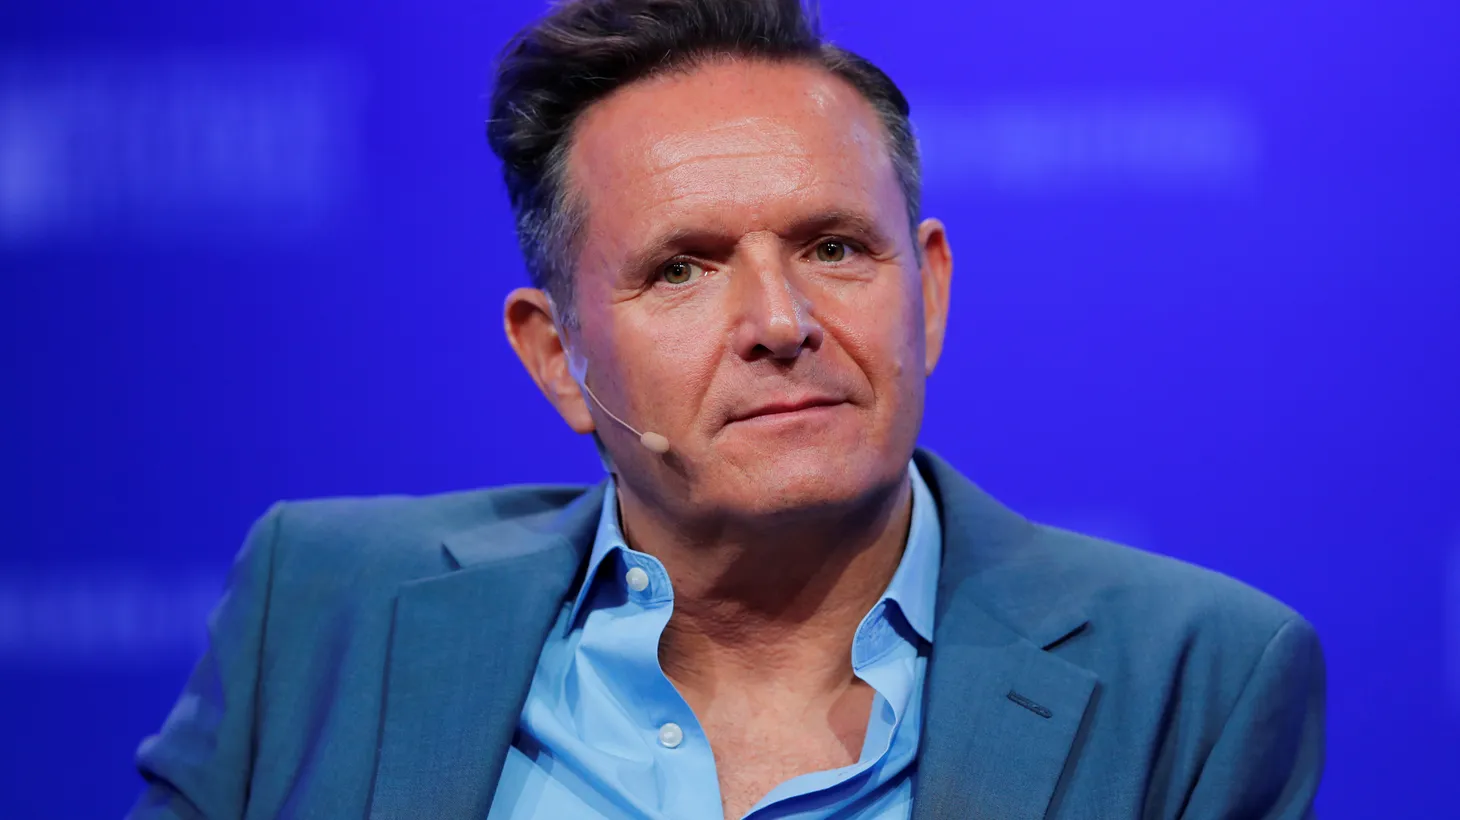 Mark Burnett, President of MGM Television and Digital Group, speaks at the Milken Institute 21st Global Conference in Beverly Hills, Calif., on May 1, 2018.